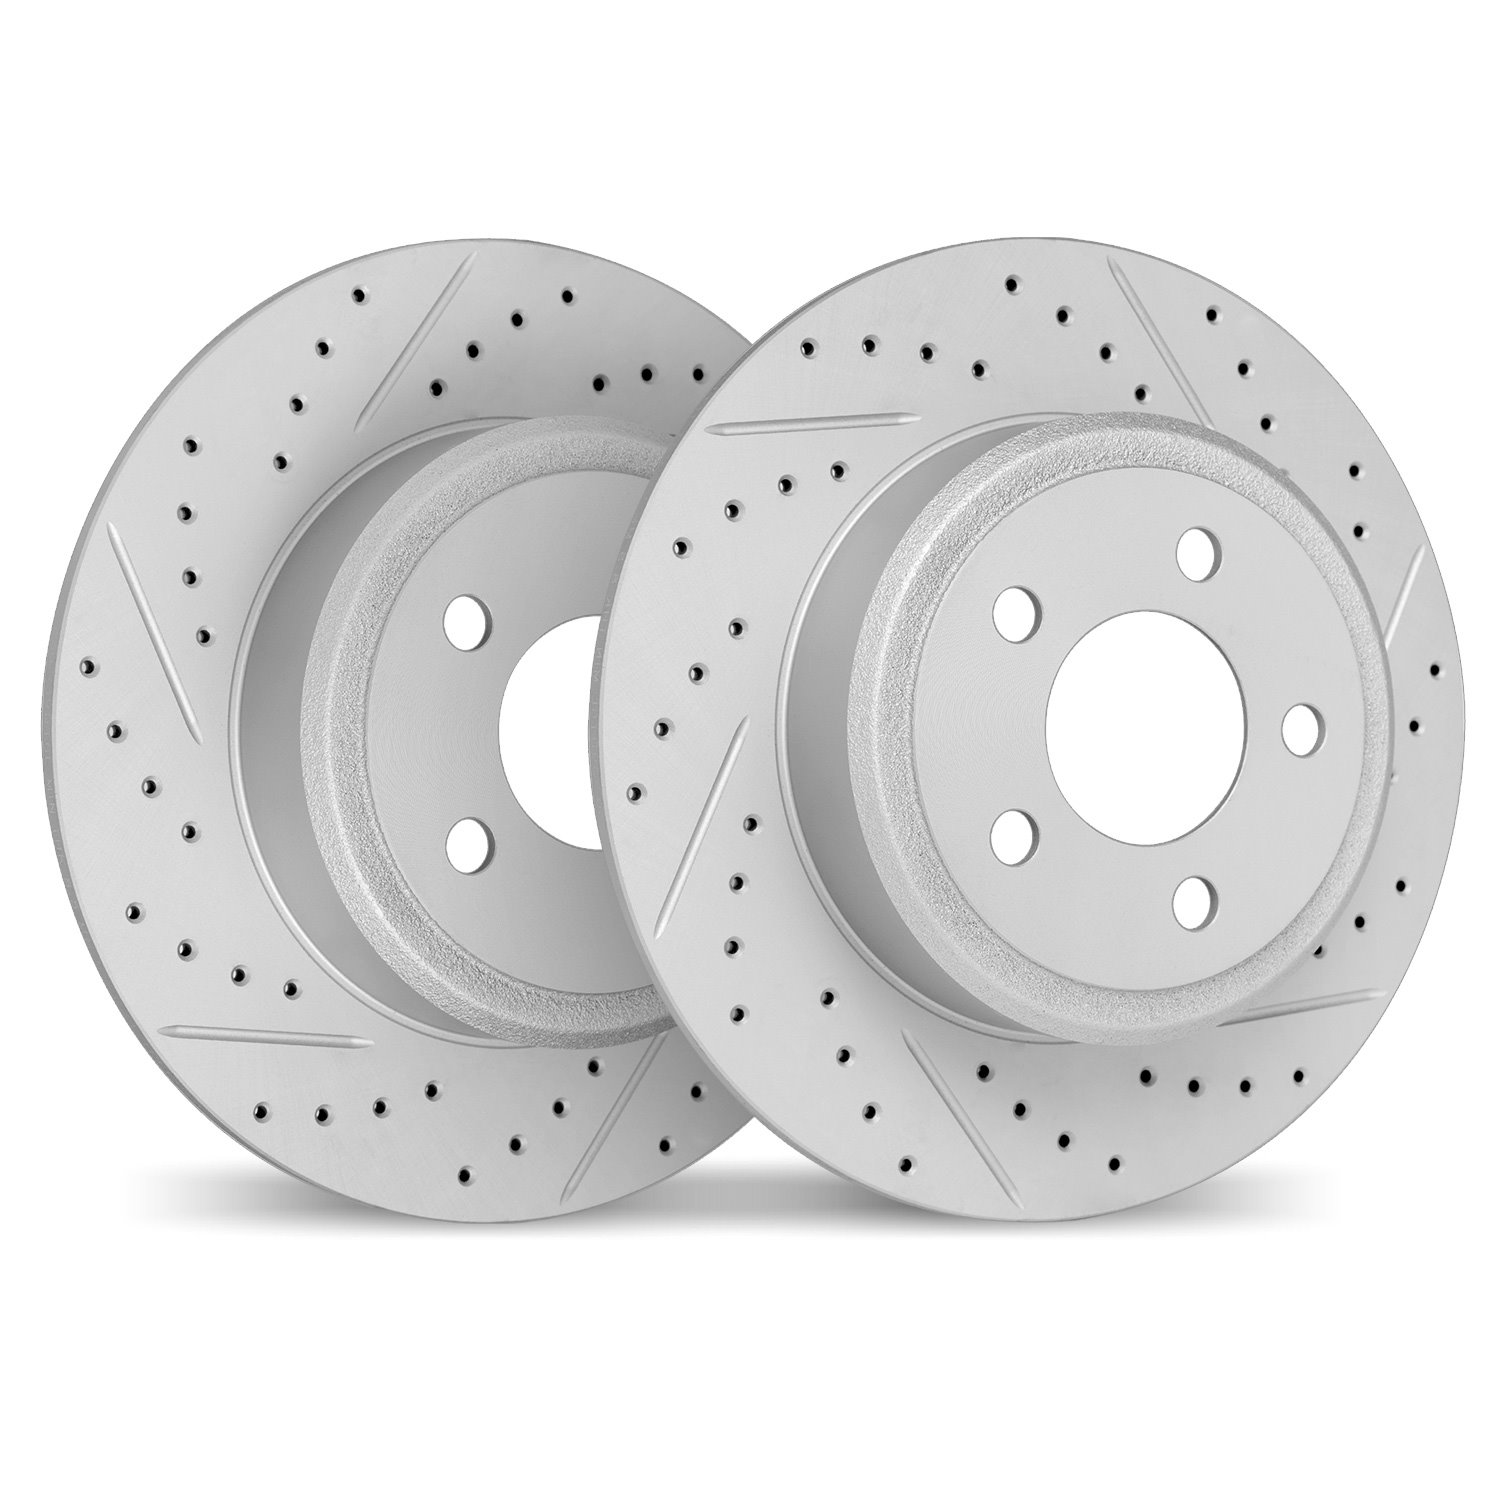 2002-58069 Geoperformance Drilled/Slotted Brake Rotors, Fits Select Acura/Honda, Position: Rear